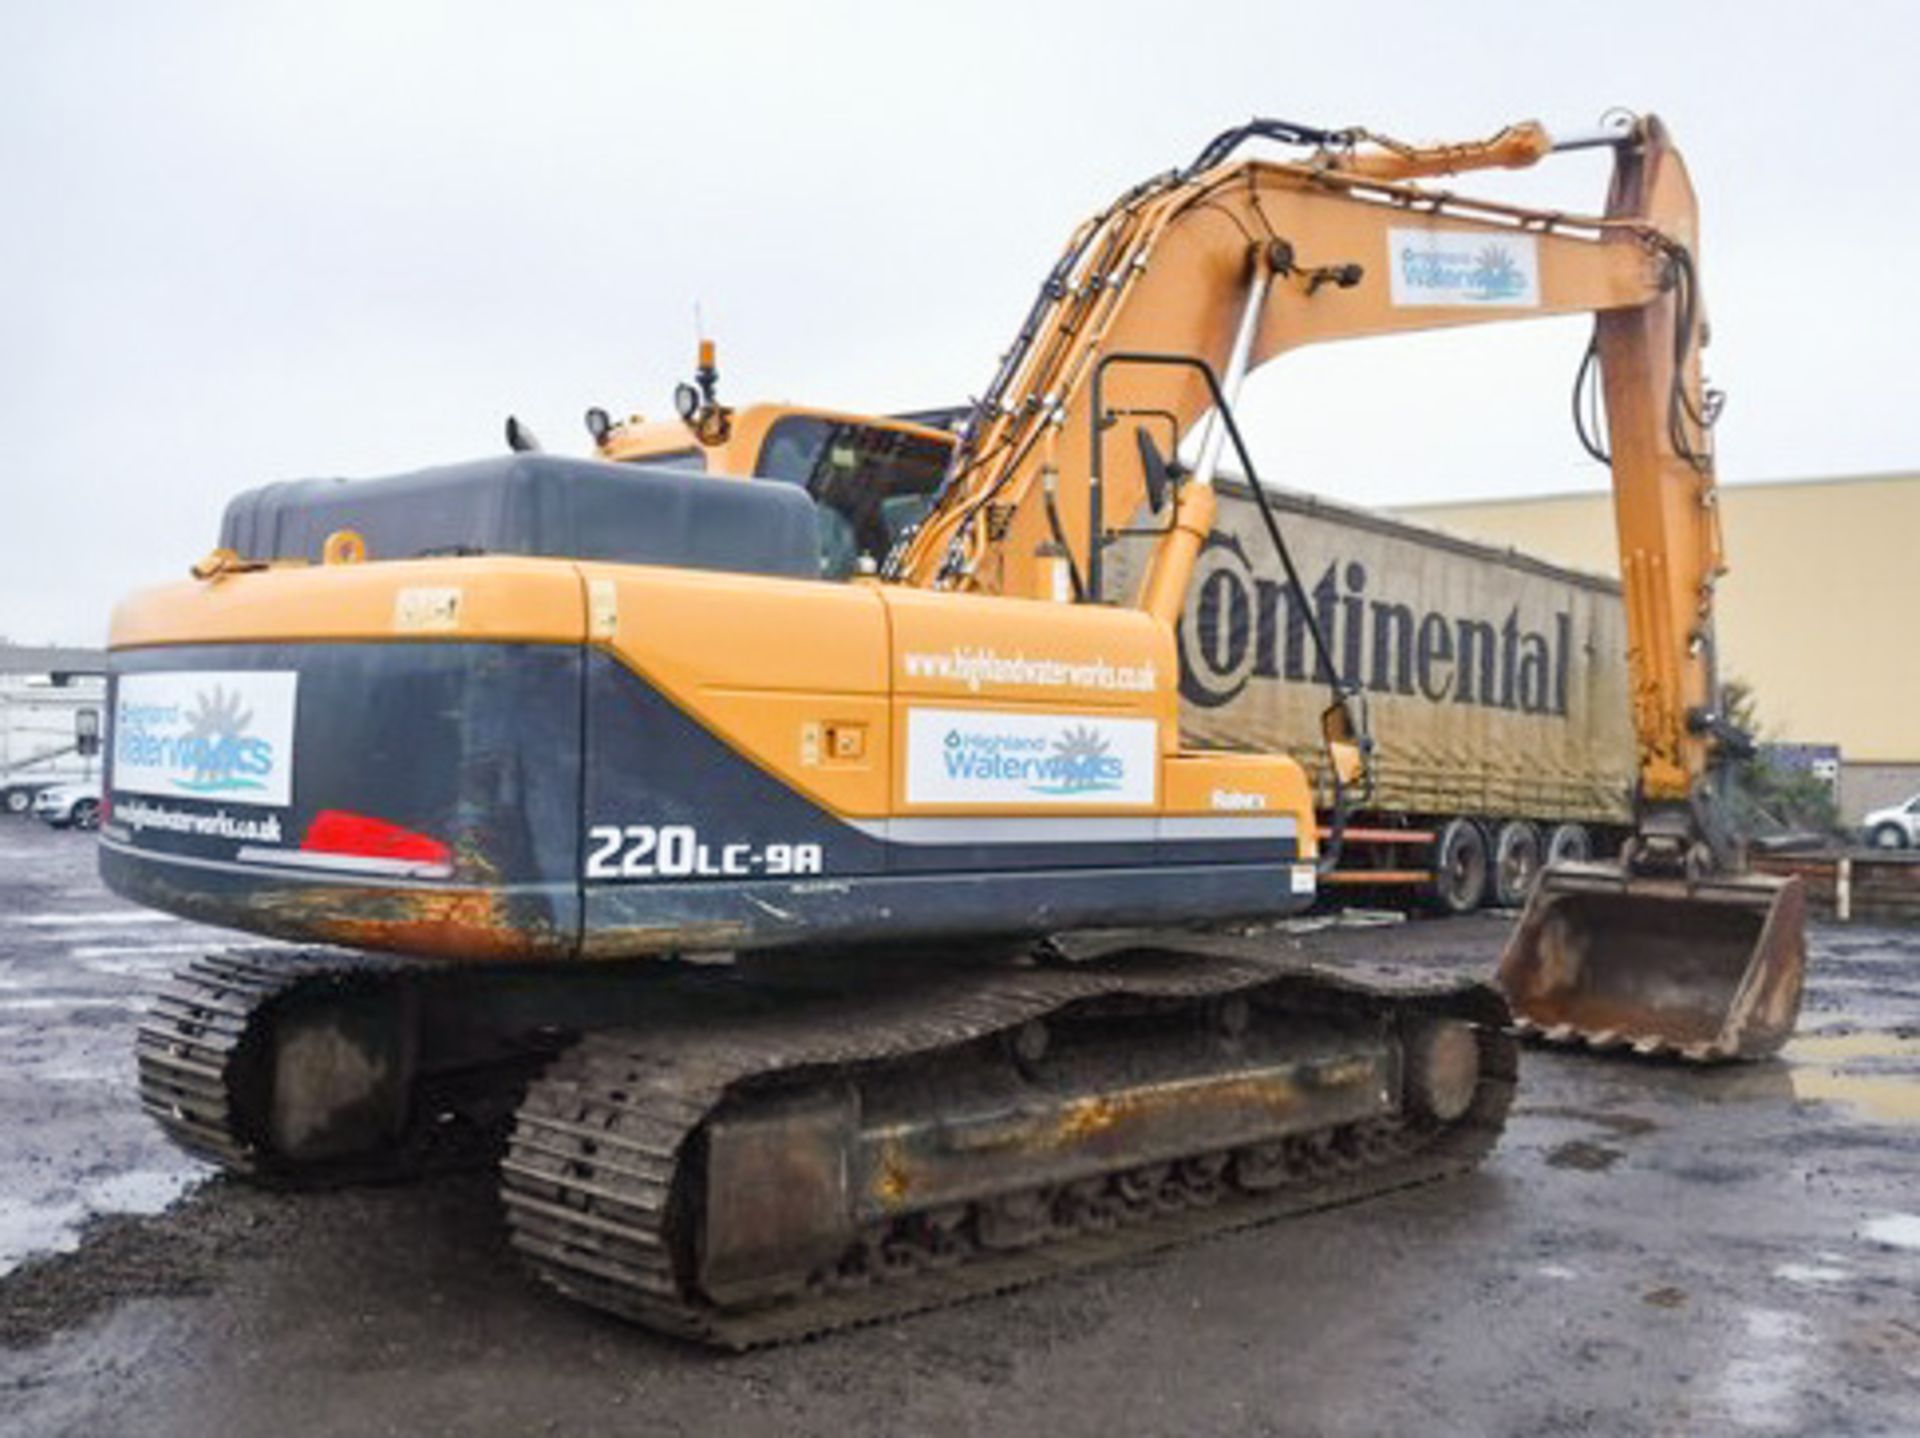 2014 HYUNDAI RC220 LC9A, S/N 359, 2340HRS (NOT VERIFIED), 1 BUCKET, MAX REACH 10M, HYD LINES FOR PIP - Image 13 of 17